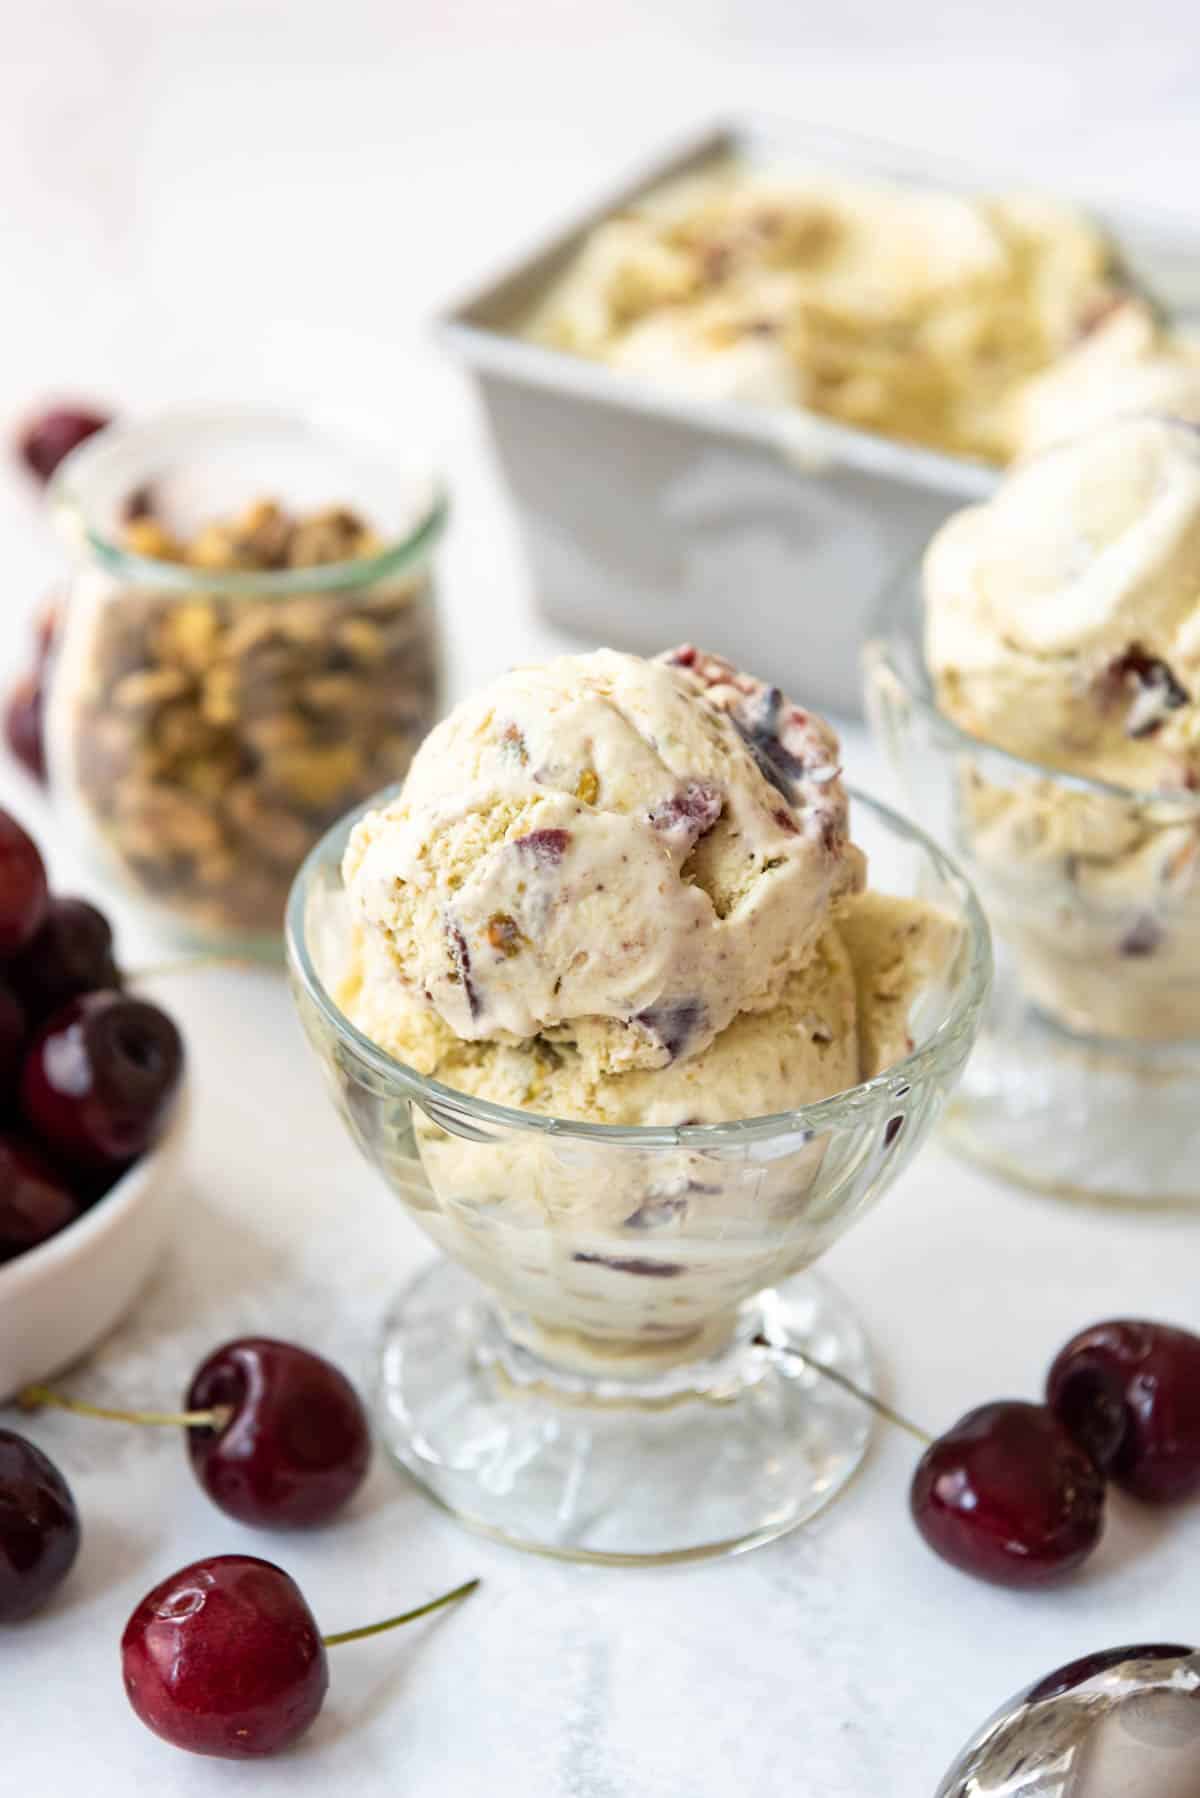 A scoop of cherry pistachio ice cream in a glass dish in front of more ice cream surrounded by pistachios and cherries.